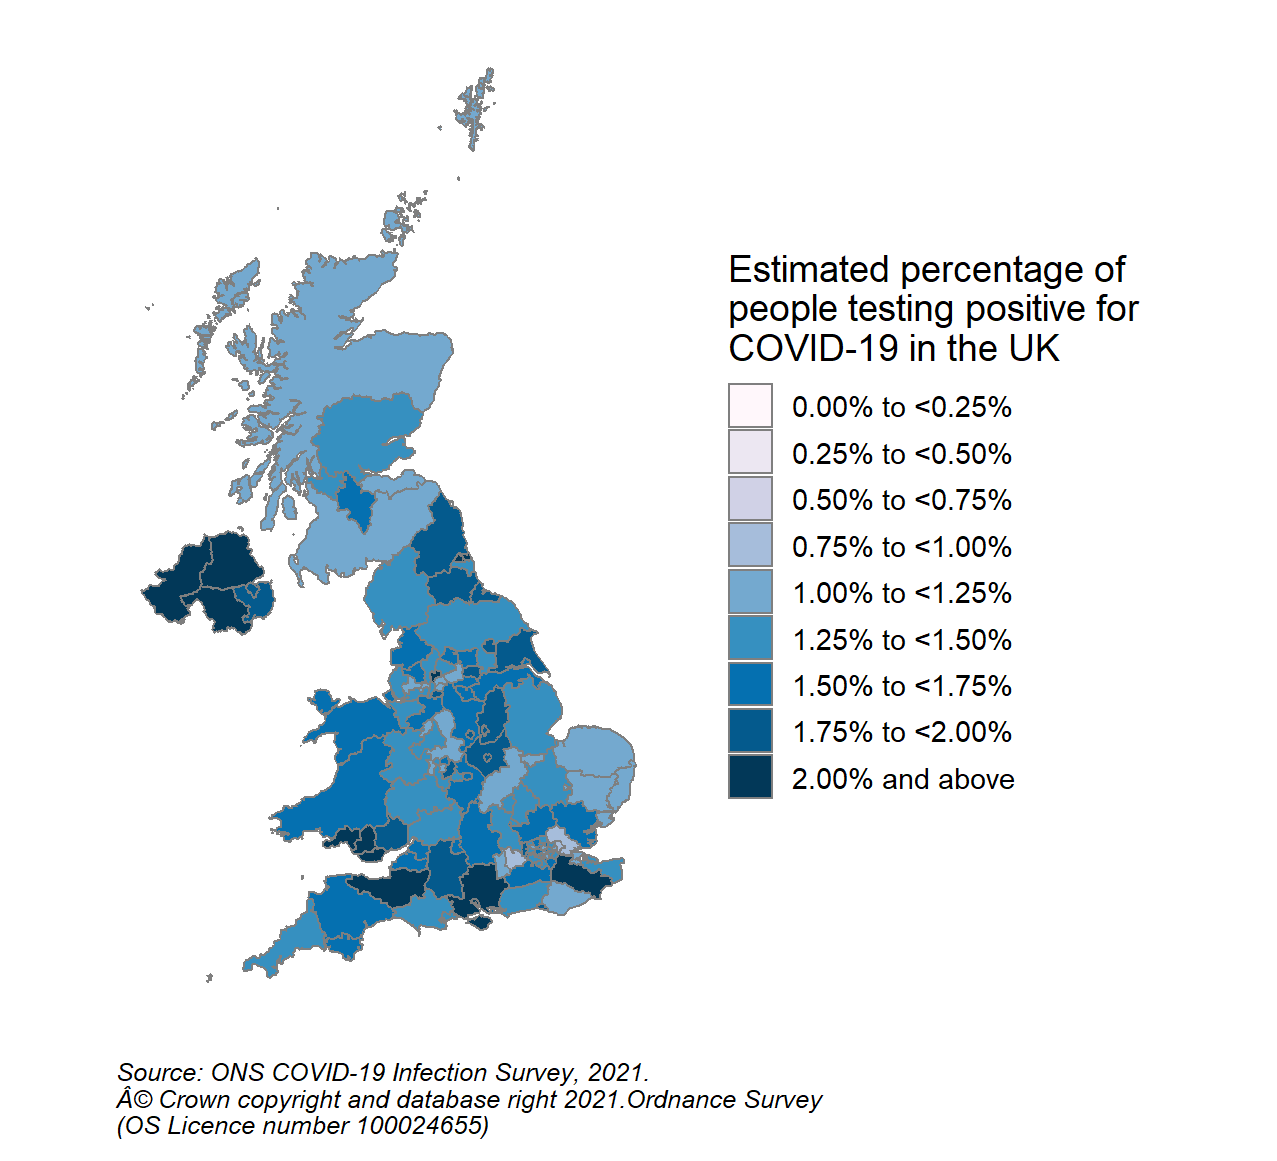 This colour coded map of the UK shows the modelled estimates of the percentage of the private residential population testing positive for COVID-19, by COVID-19 Infection Survey sub-regions. In Scotland, these sub-regions are comprised of Health Boards. The regions are: 123 - NHS Grampian, NHS Highland, NHS Orkney, NHS Shetland and NHS Western Isles, 124 - NHS Fife, NHS Forth Valley and NHS Tayside, 125 - NHS Greater Glasgow & Clyde, 126 - NHS Lothian, 127 - NHS Lanarkshire, 128 - NHS Ayrshire & Arran, NHS Borders and NHS Dumfries & Galloway.  The sub-region with the highest modelled estimate for the percentage of people testing positive was CIS Region 127 (NHS Lanarkshire) at 1.64% (95% credible interval: 1.30% to 2.05%).  The sub-region with the lowest modelled estimate was Region 128 (NHS Ayrshire & Arran, NHS Borders and NHS Dumfries & Galloway), at 1.02% (95% credible interval: 0.78% to 1.29%).